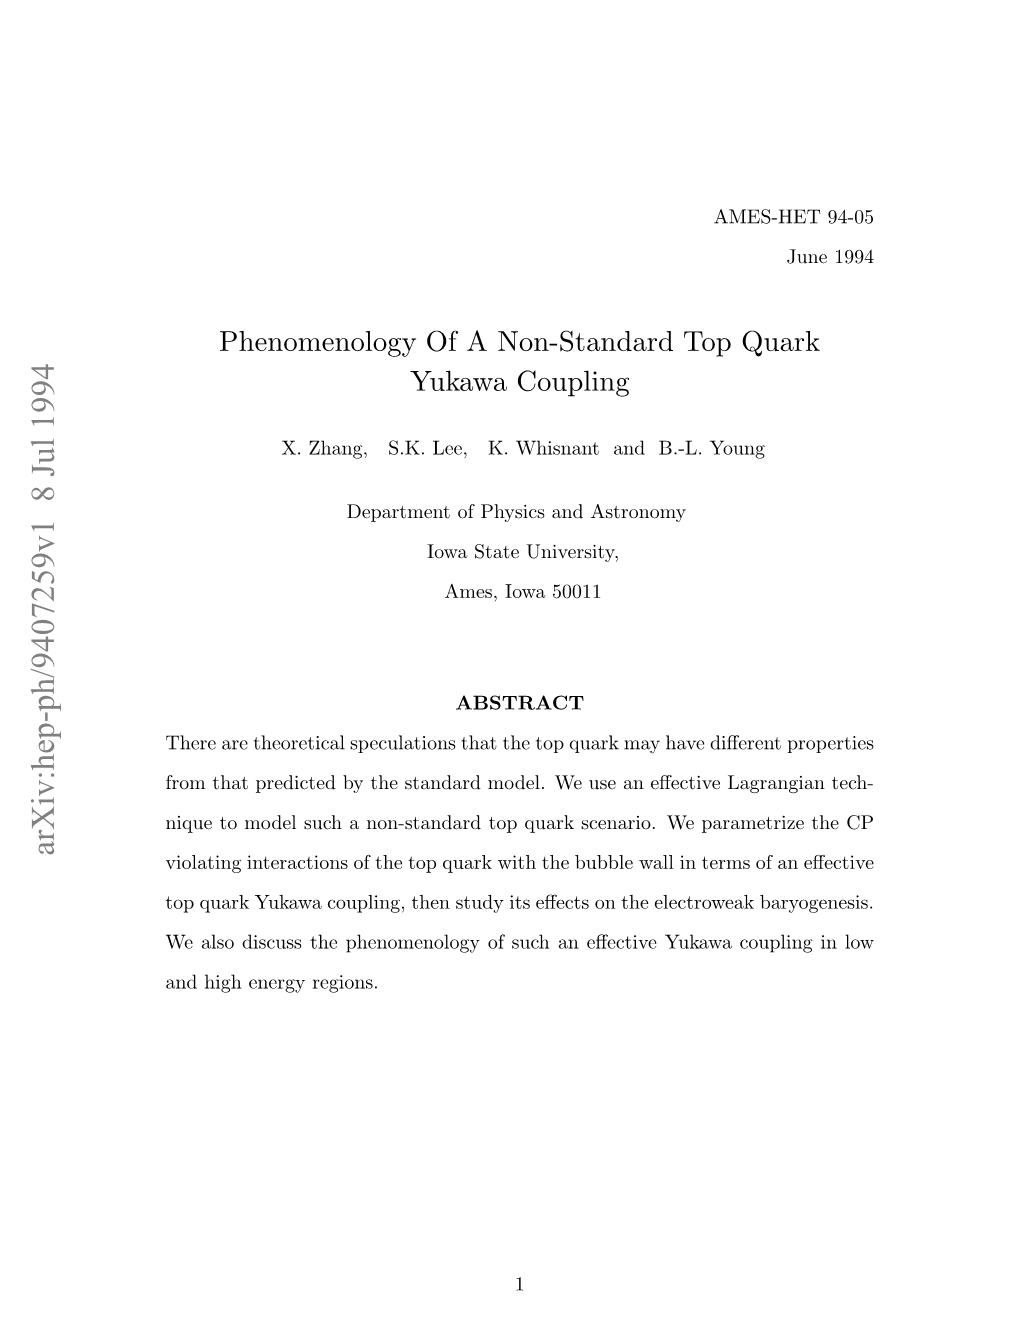 Phenomenology of a Non-Standard Top Quark Yukawa Coupling in Electroweak Baryogenesis and in Low and High Energy Processes